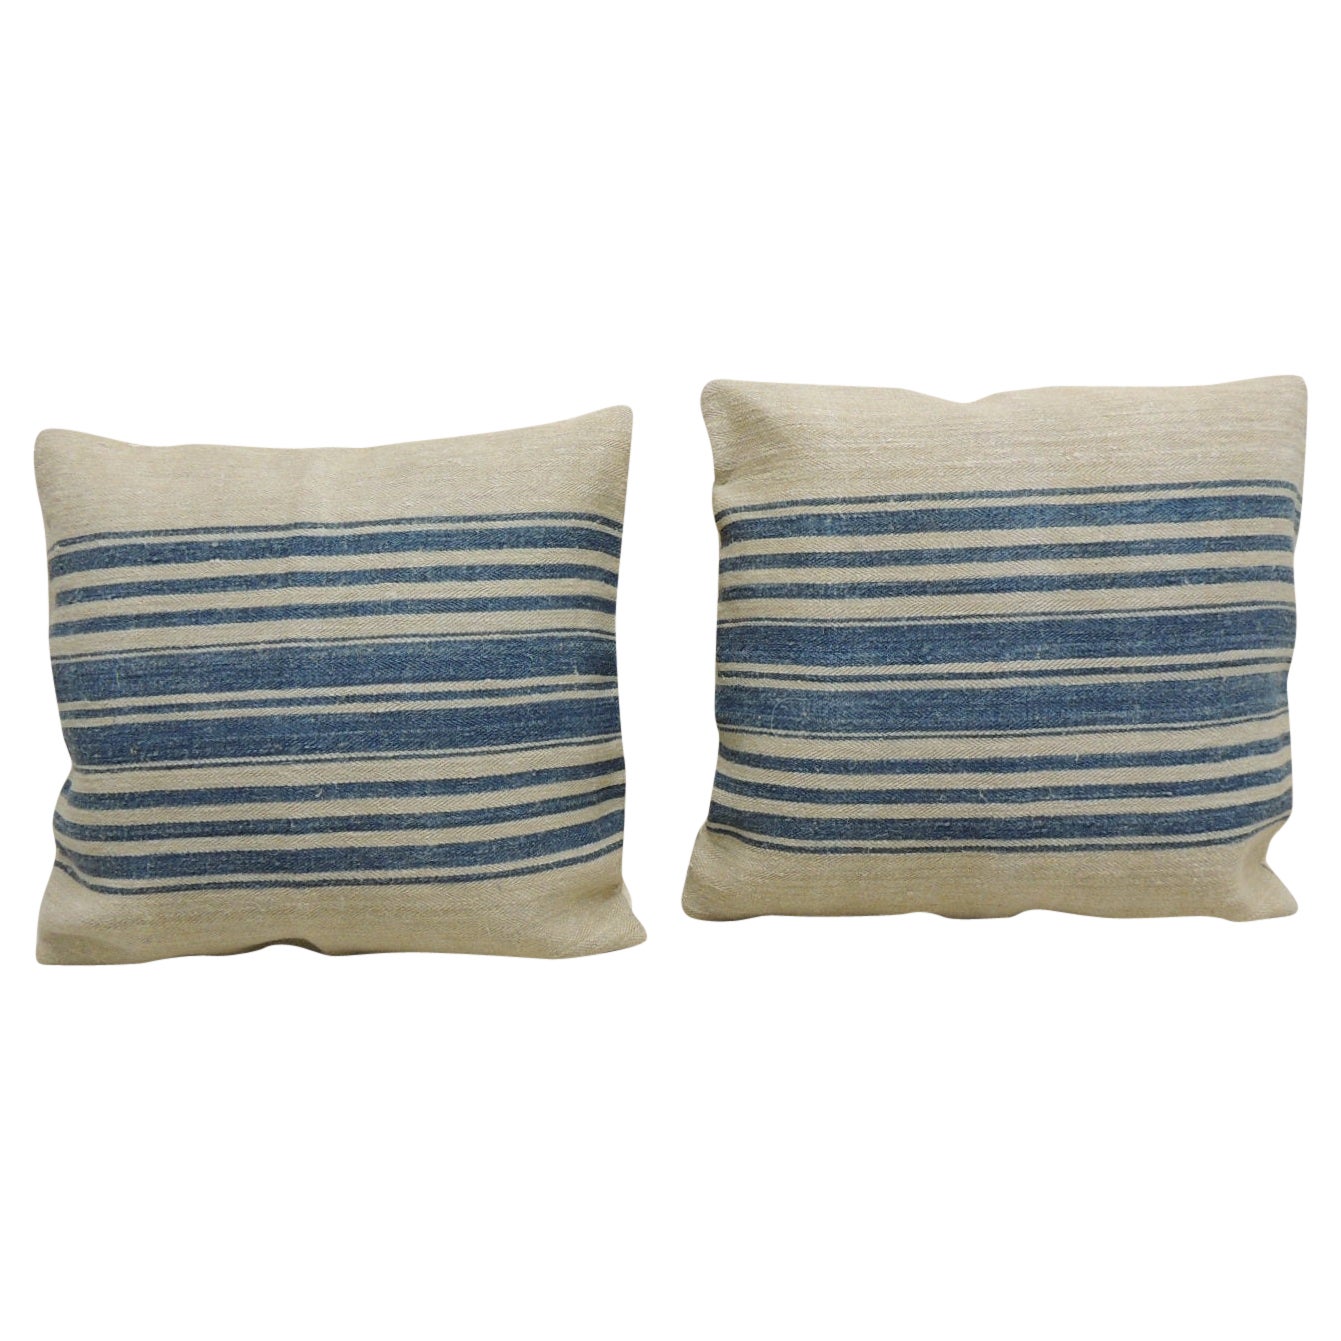 Pair of Blue and Stone French Grain Sack Decorative Square Pillows